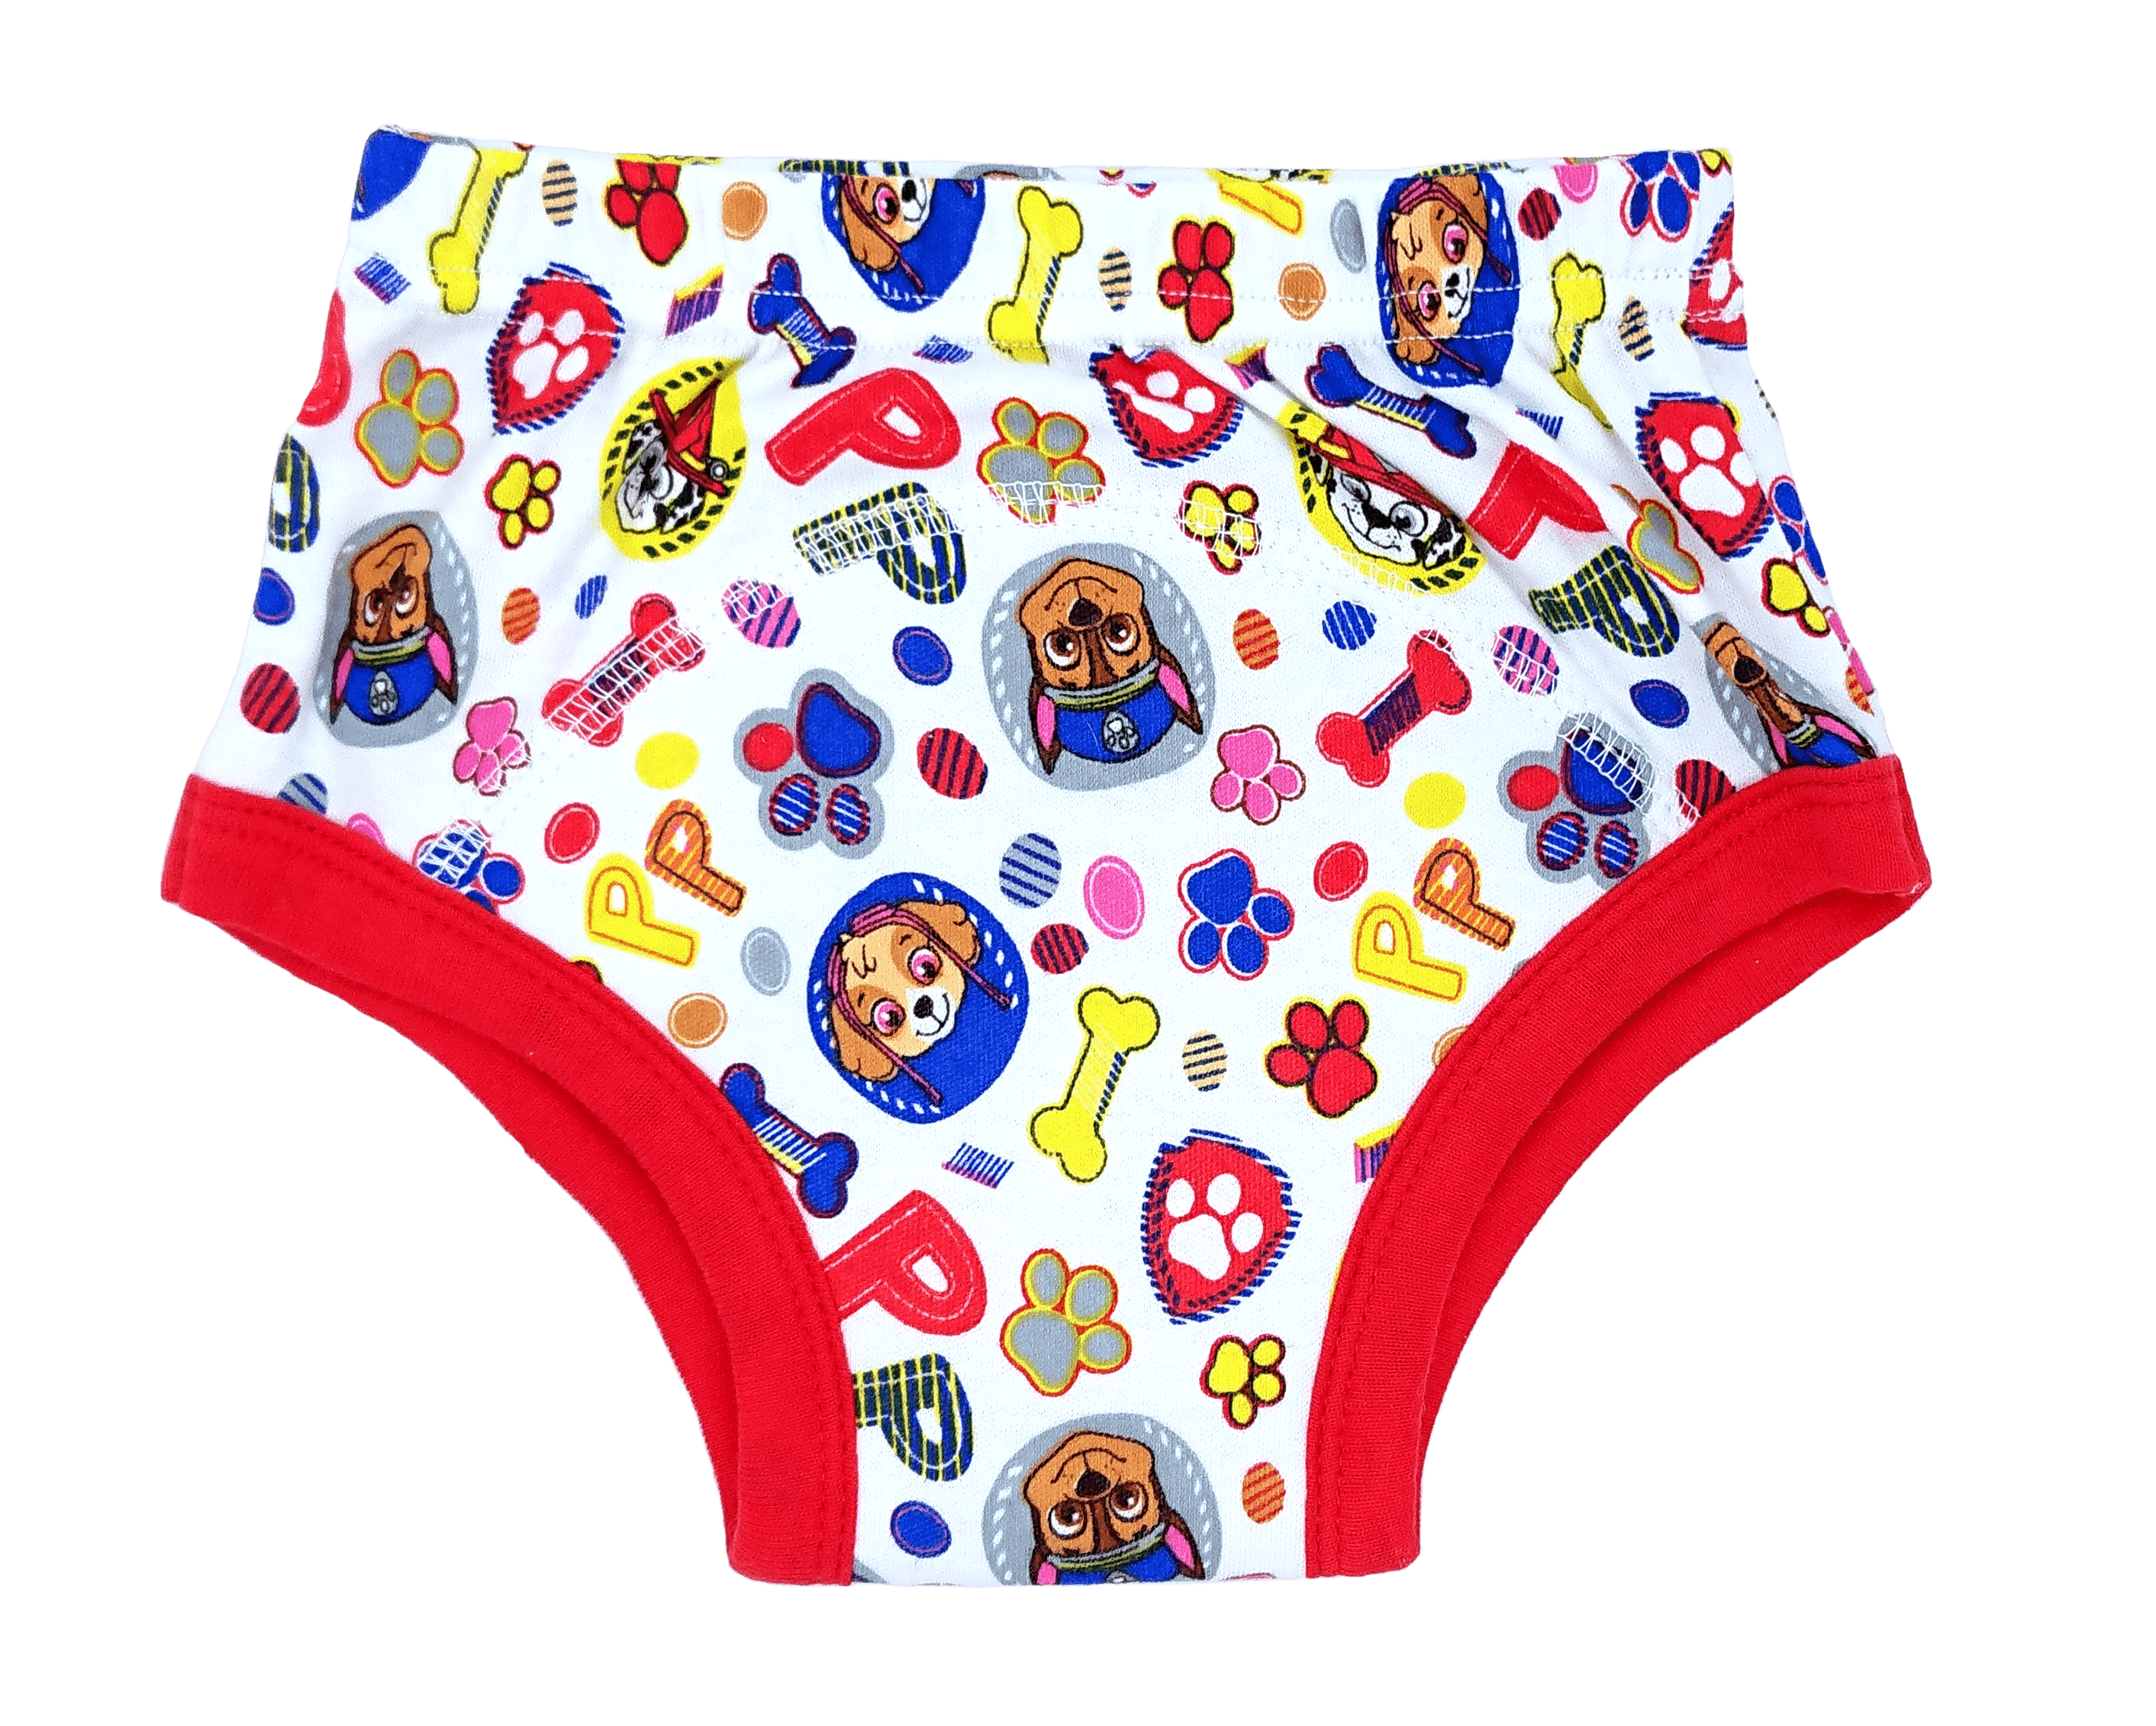 Training Pants vs Underwear: What's The Best Way To Potty Train